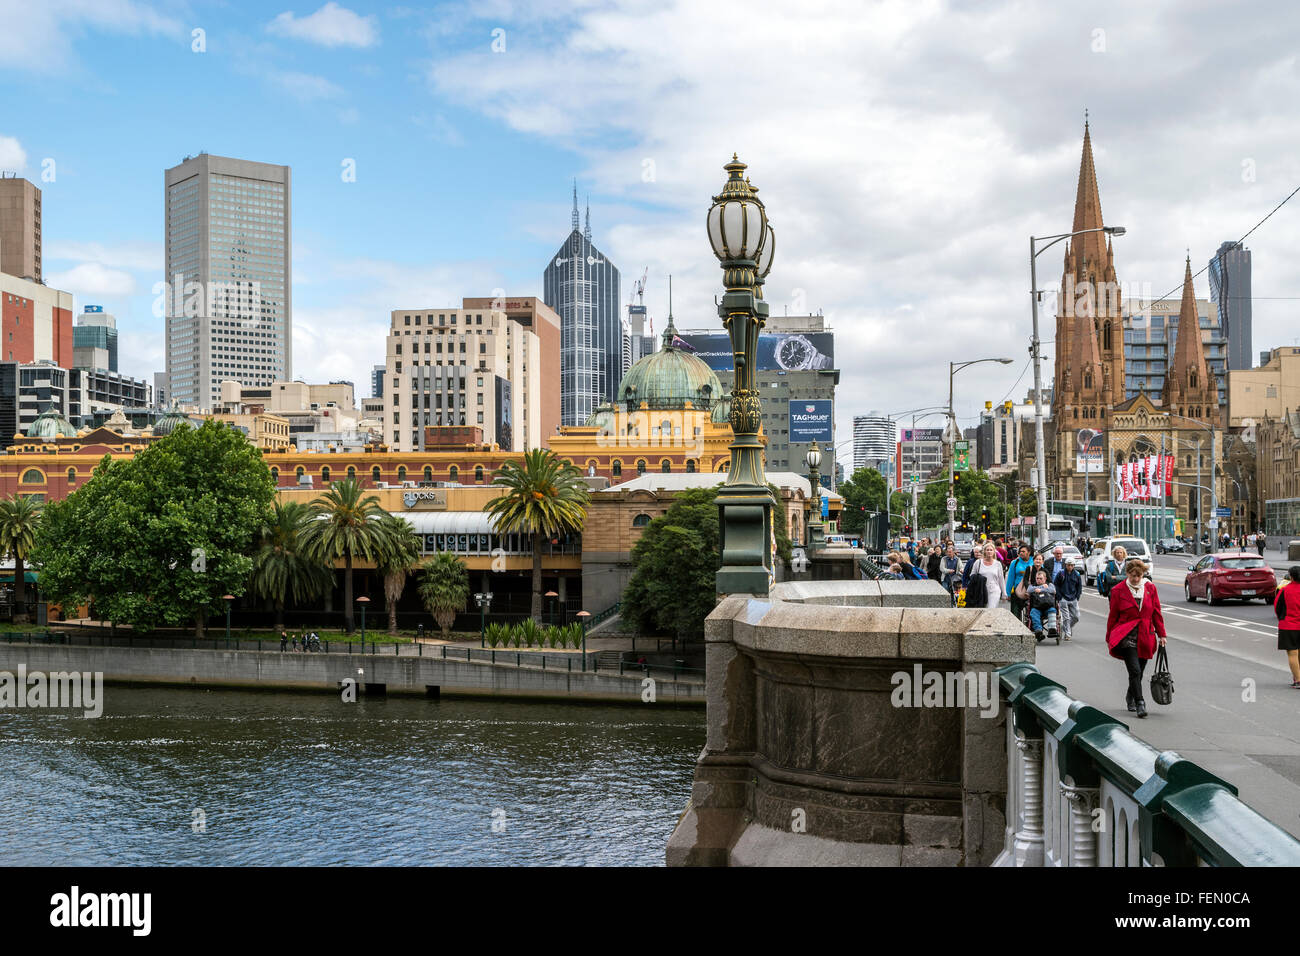 Princes Bridge, Yarra River with Flinders Street Station and St Paul's Cathedral, Melbourne, Australia Stock Photo